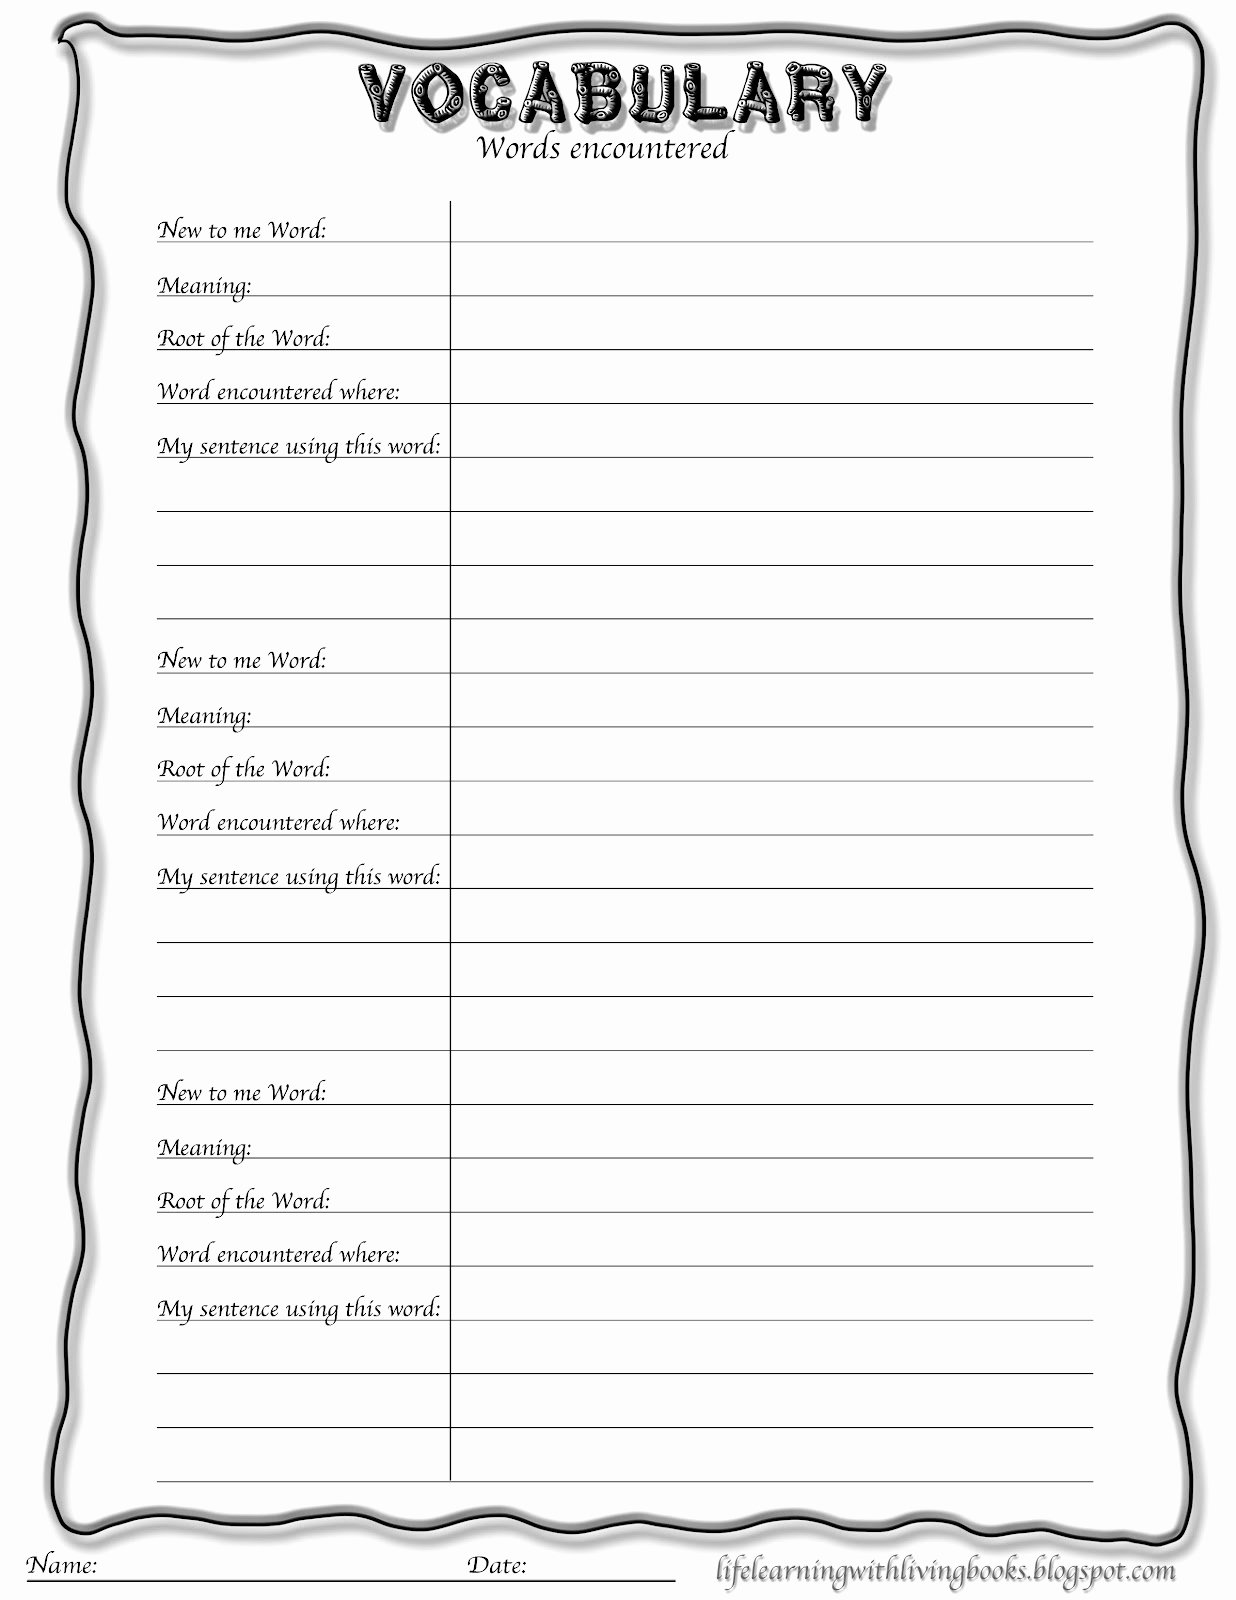 Blank Vocabulary Worksheet Template Elegant Life Learning with Living Books Curriculum Inspired by